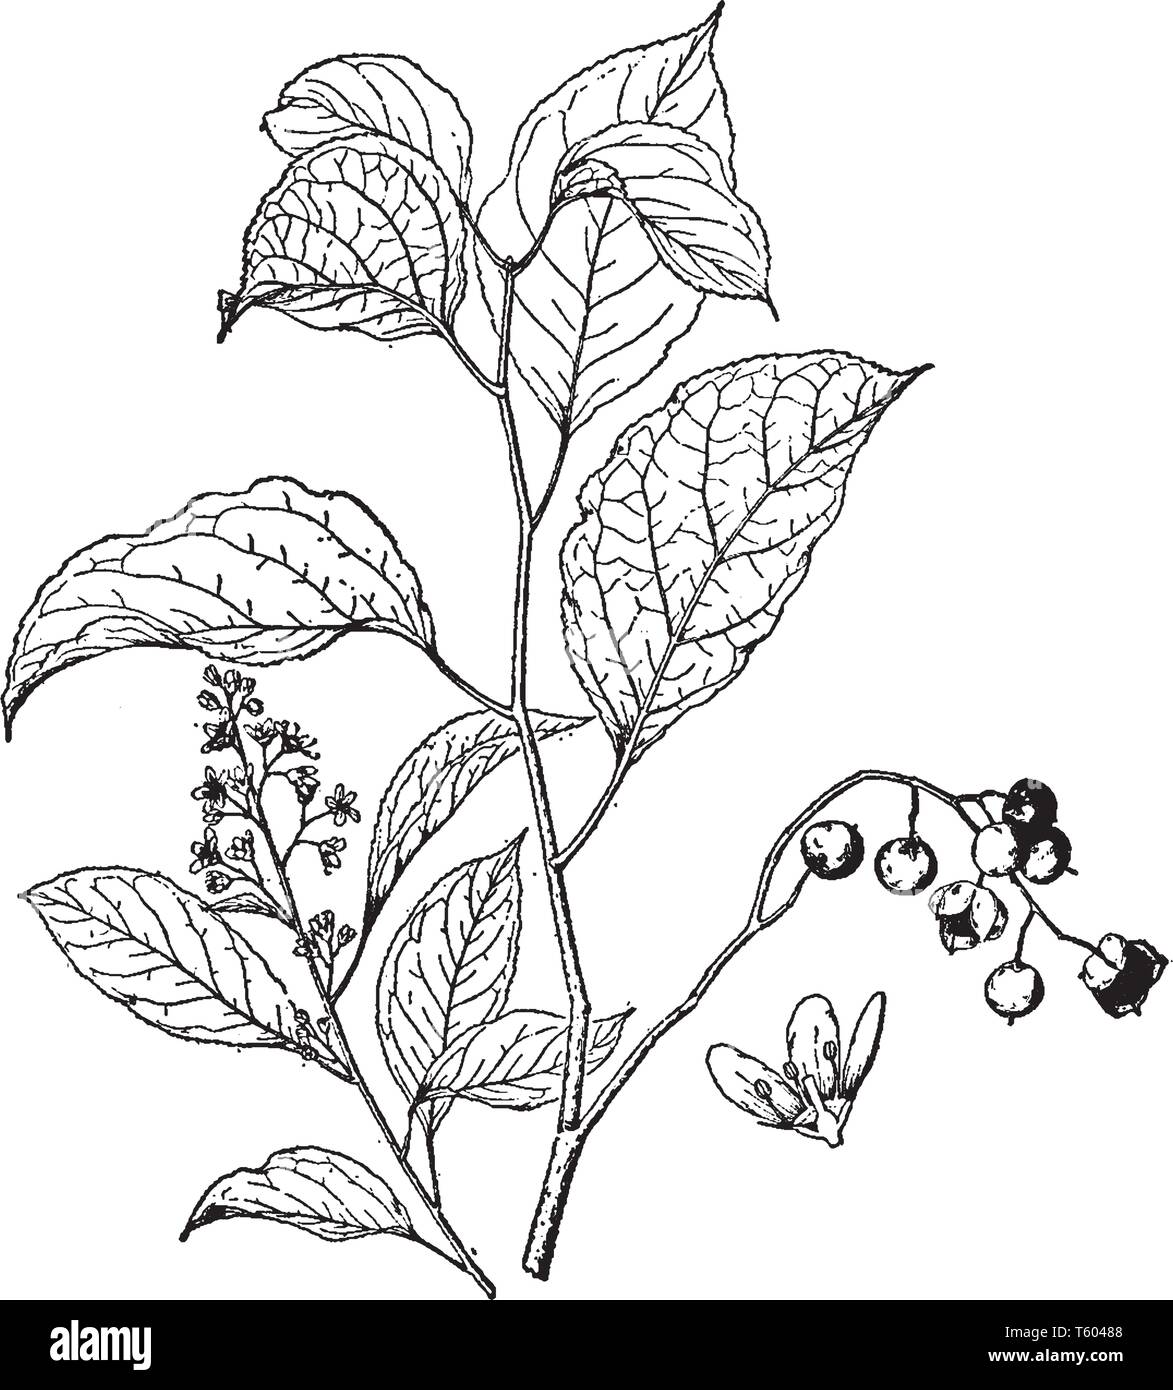 Celastrus Scandens is known as false bitter sweet and wax work. The shrub is growing up to twenty feet tall, vintage line drawing or engraving illustr Stock Vector